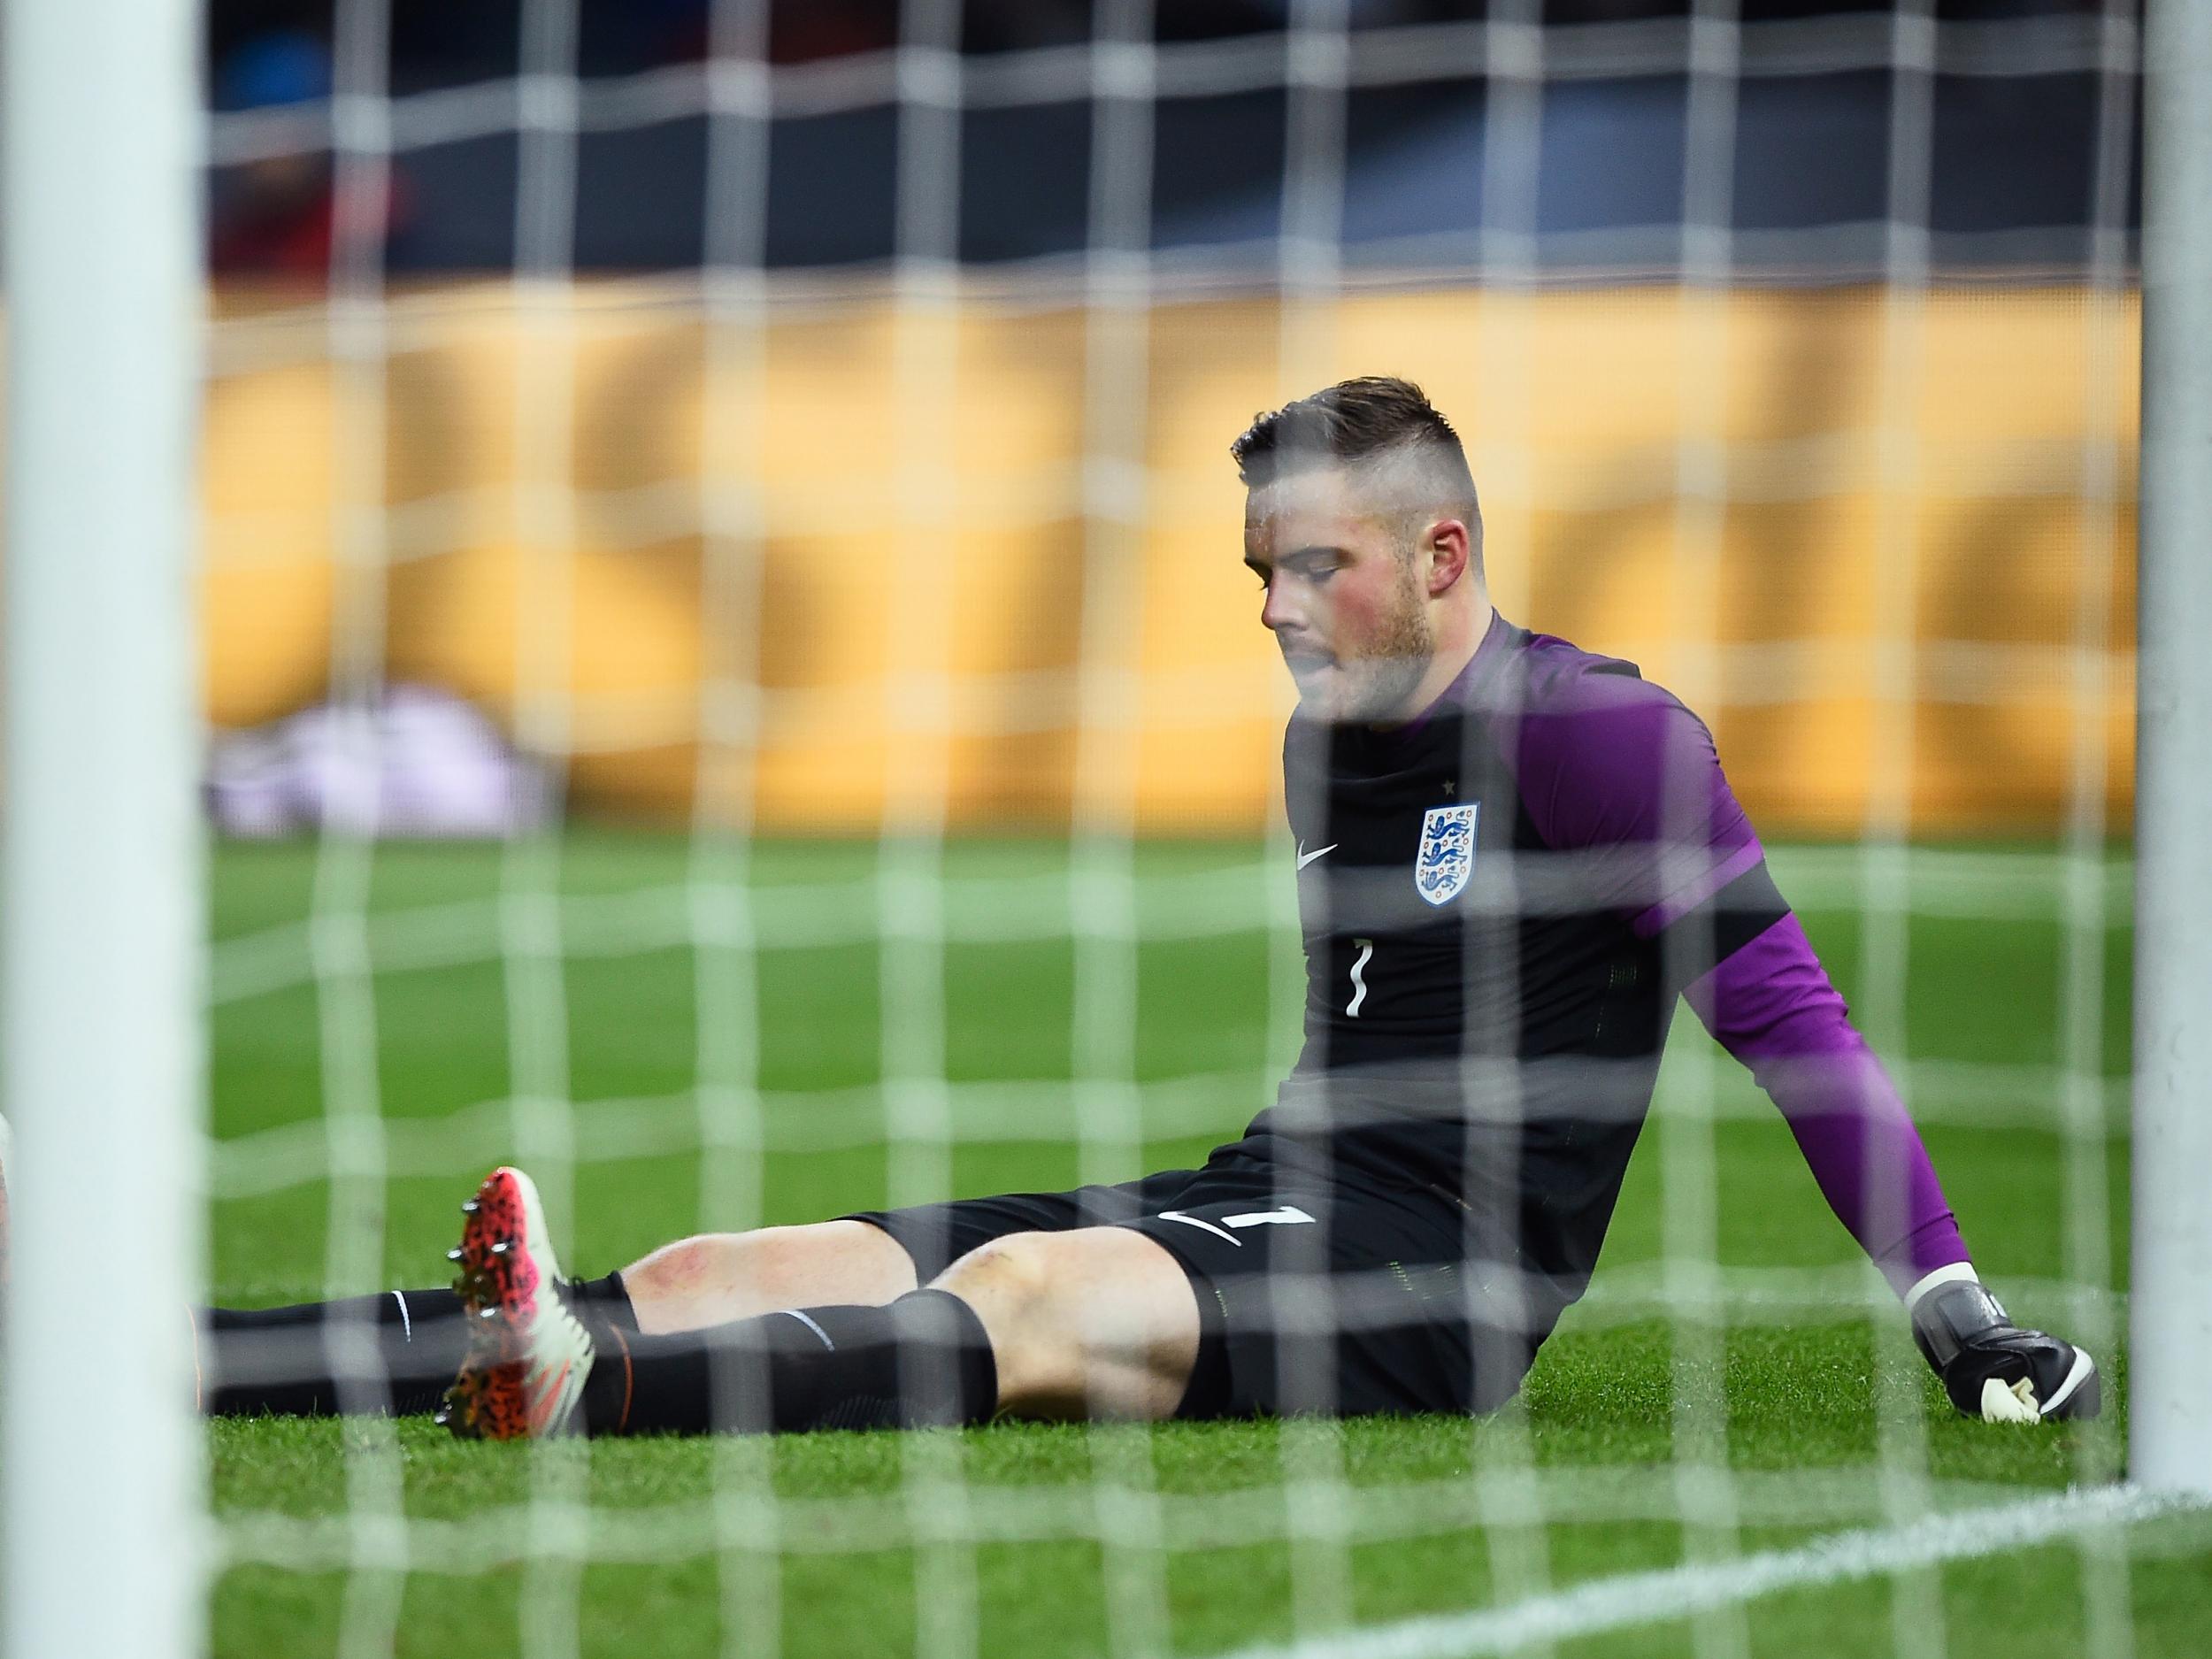 Jack Butland appears dejected after sustaining an ankle injury against Germany